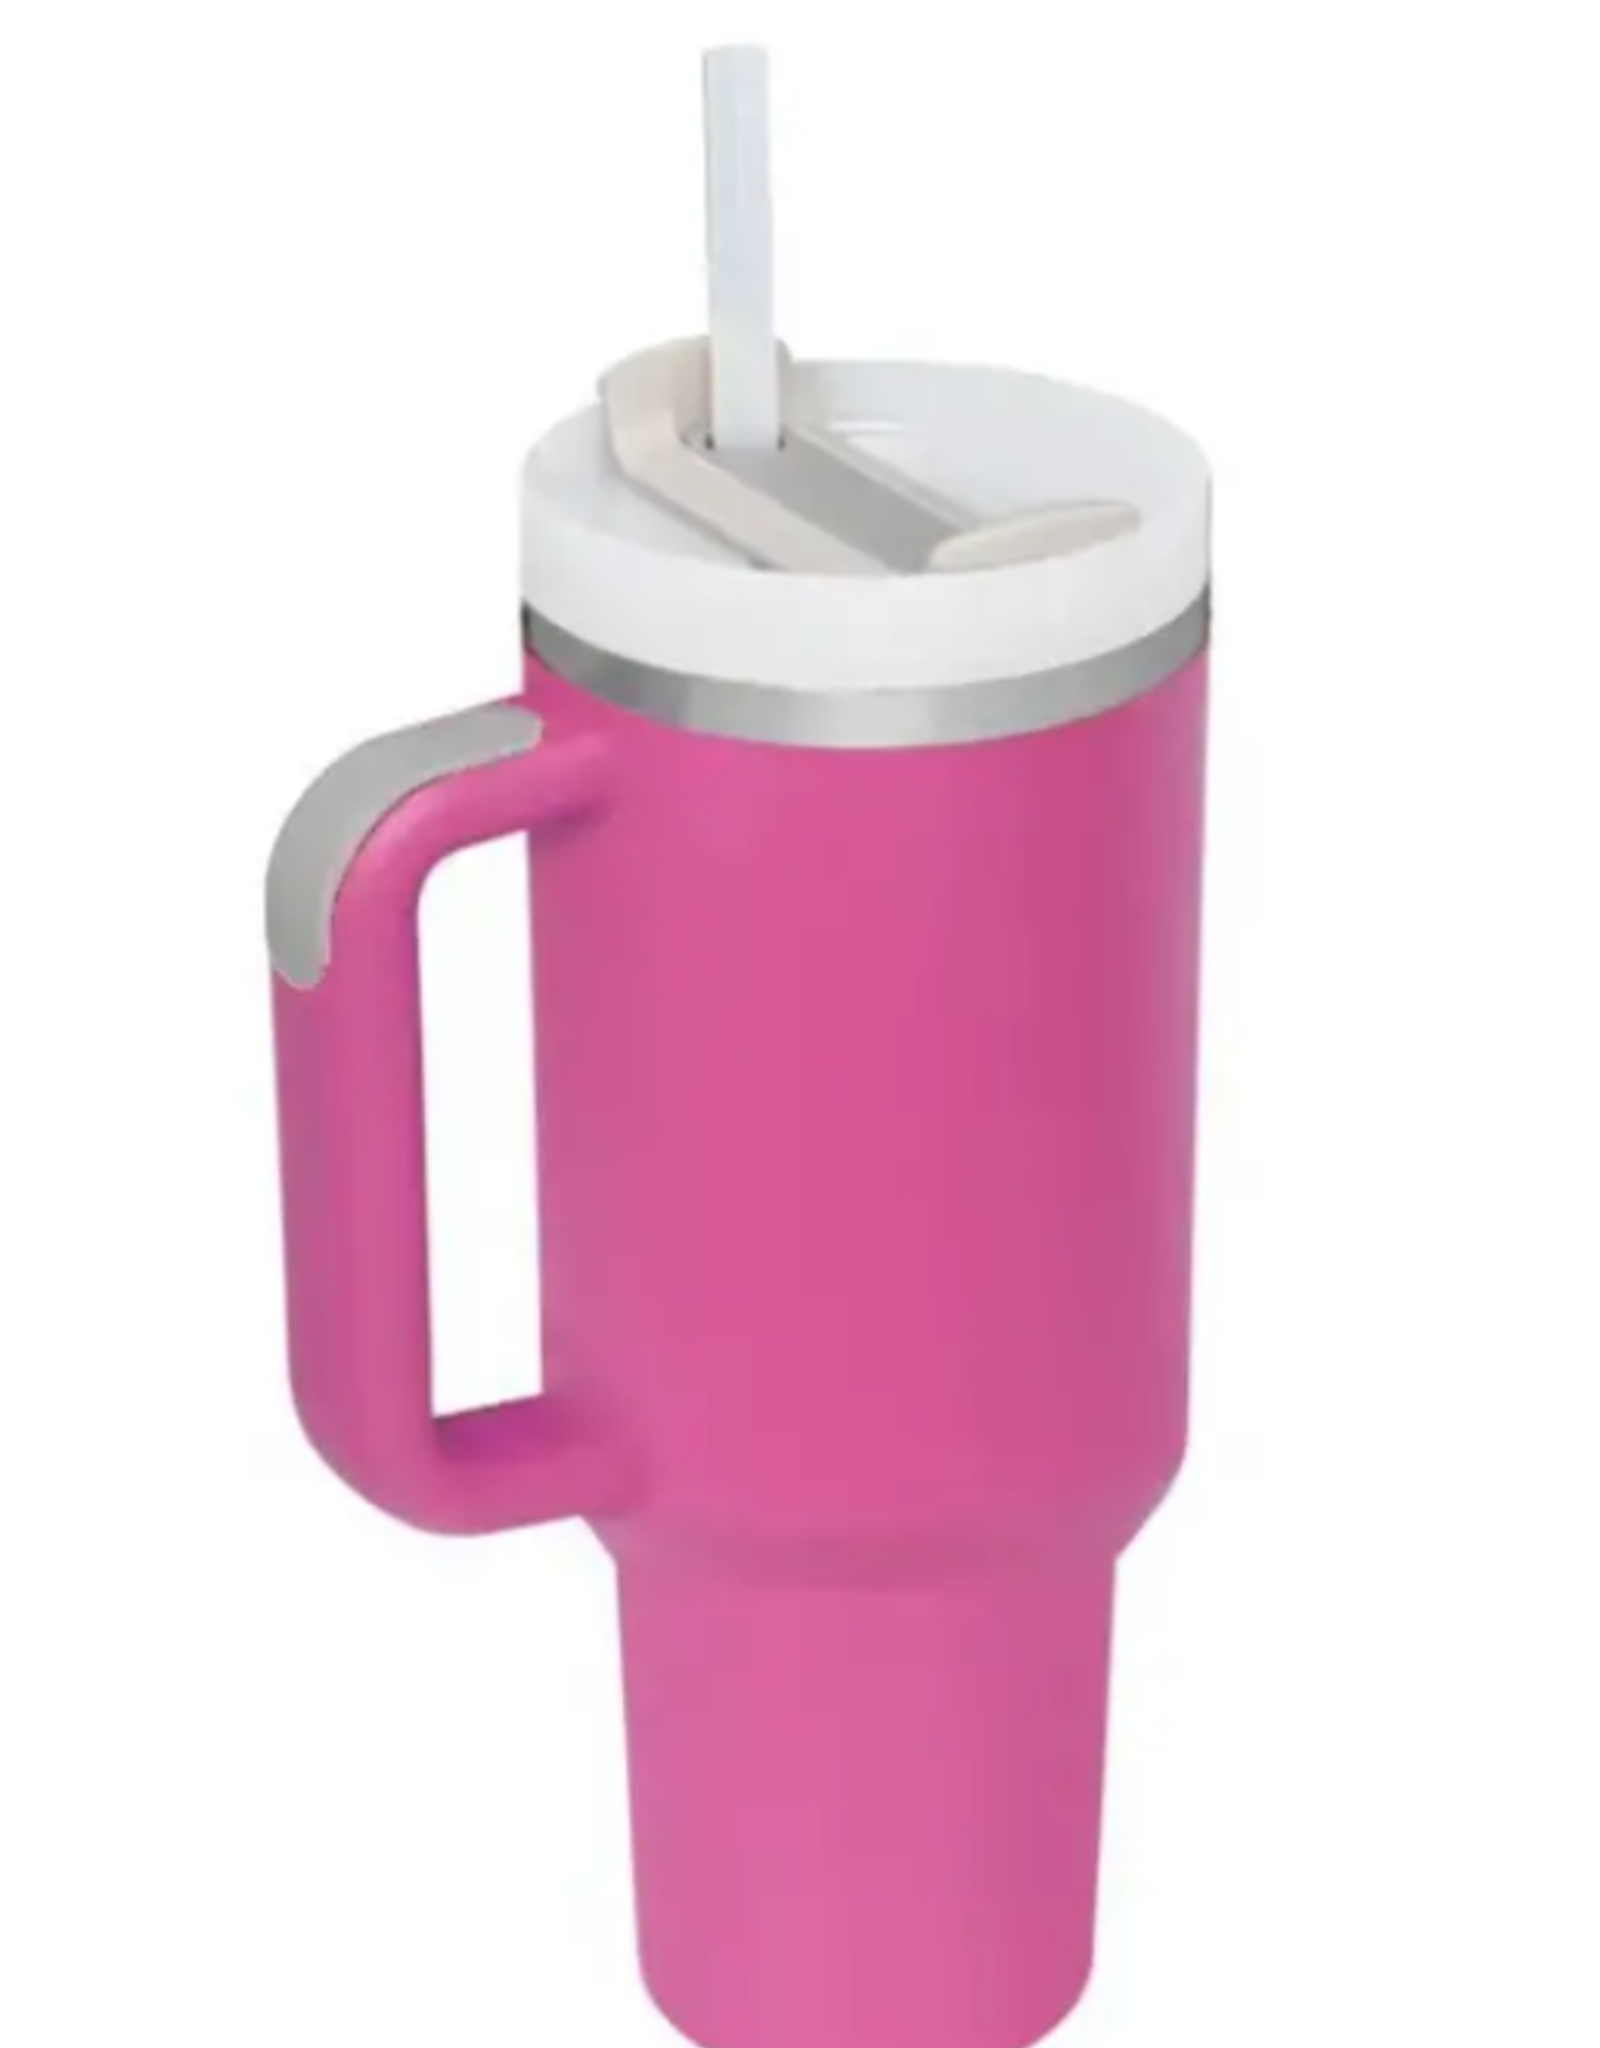 TRAVEL MUG/CUP- THERMAL- STAINLESS STEEL- INSULATED CUP- 10.6X6- (TOP 3.8"/BASE 3")- 40 OZ - ASSORTED COLORS